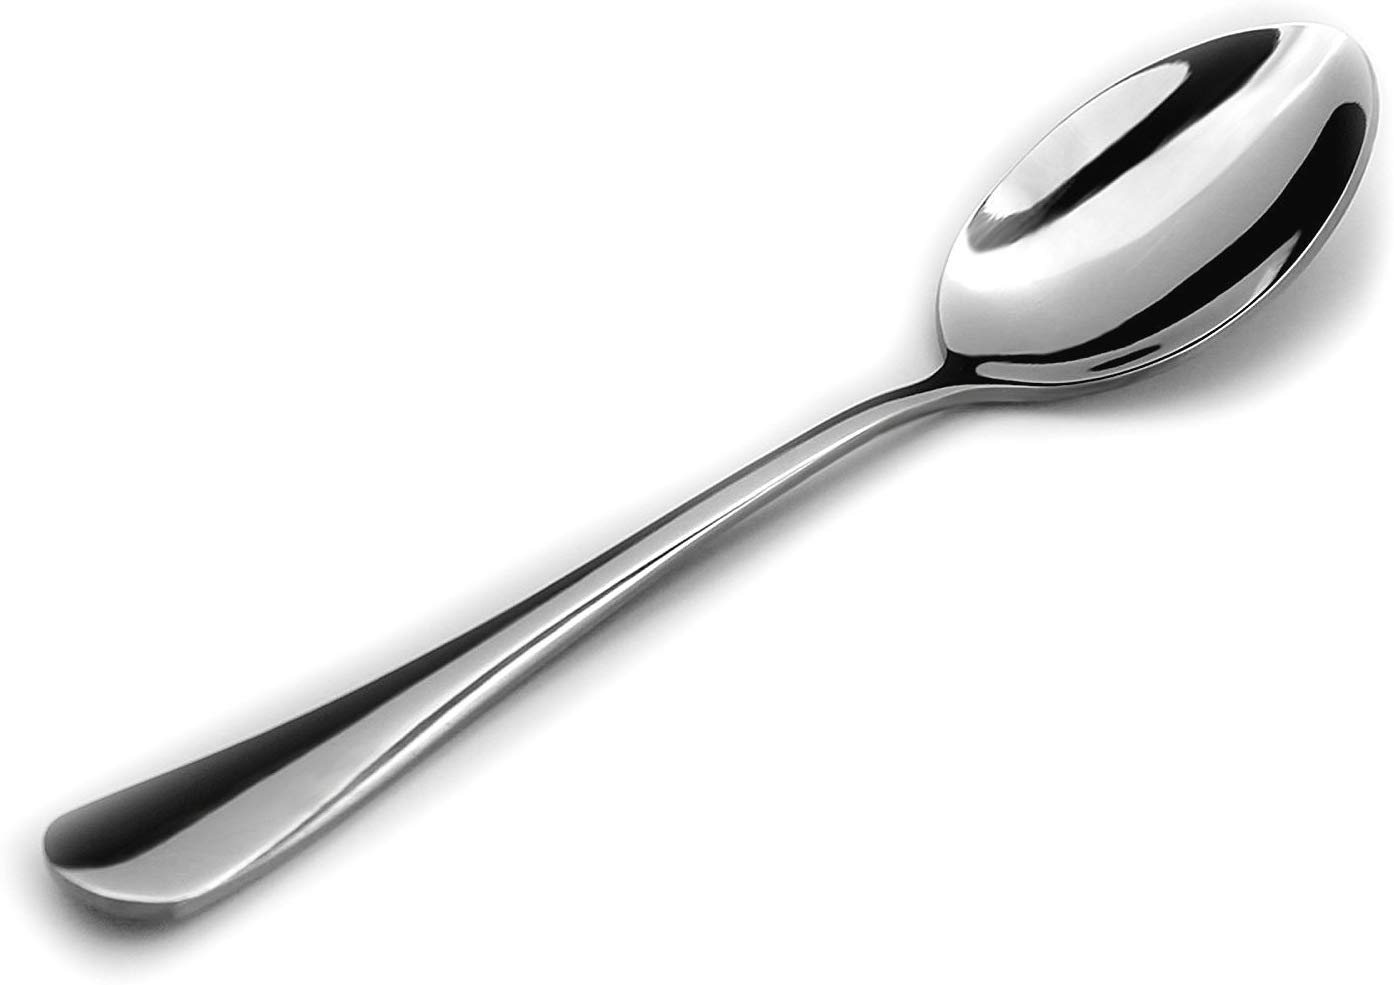 Cat Paw Stainless Steel Teaspoon 5.9 Inches.Espresso Spoons Sugar Cake Desser Stirring Stainless Steel Small Spoons for Dessert,2 PCS Ice Cream Spoon Coffee Mini Coffee Spoon